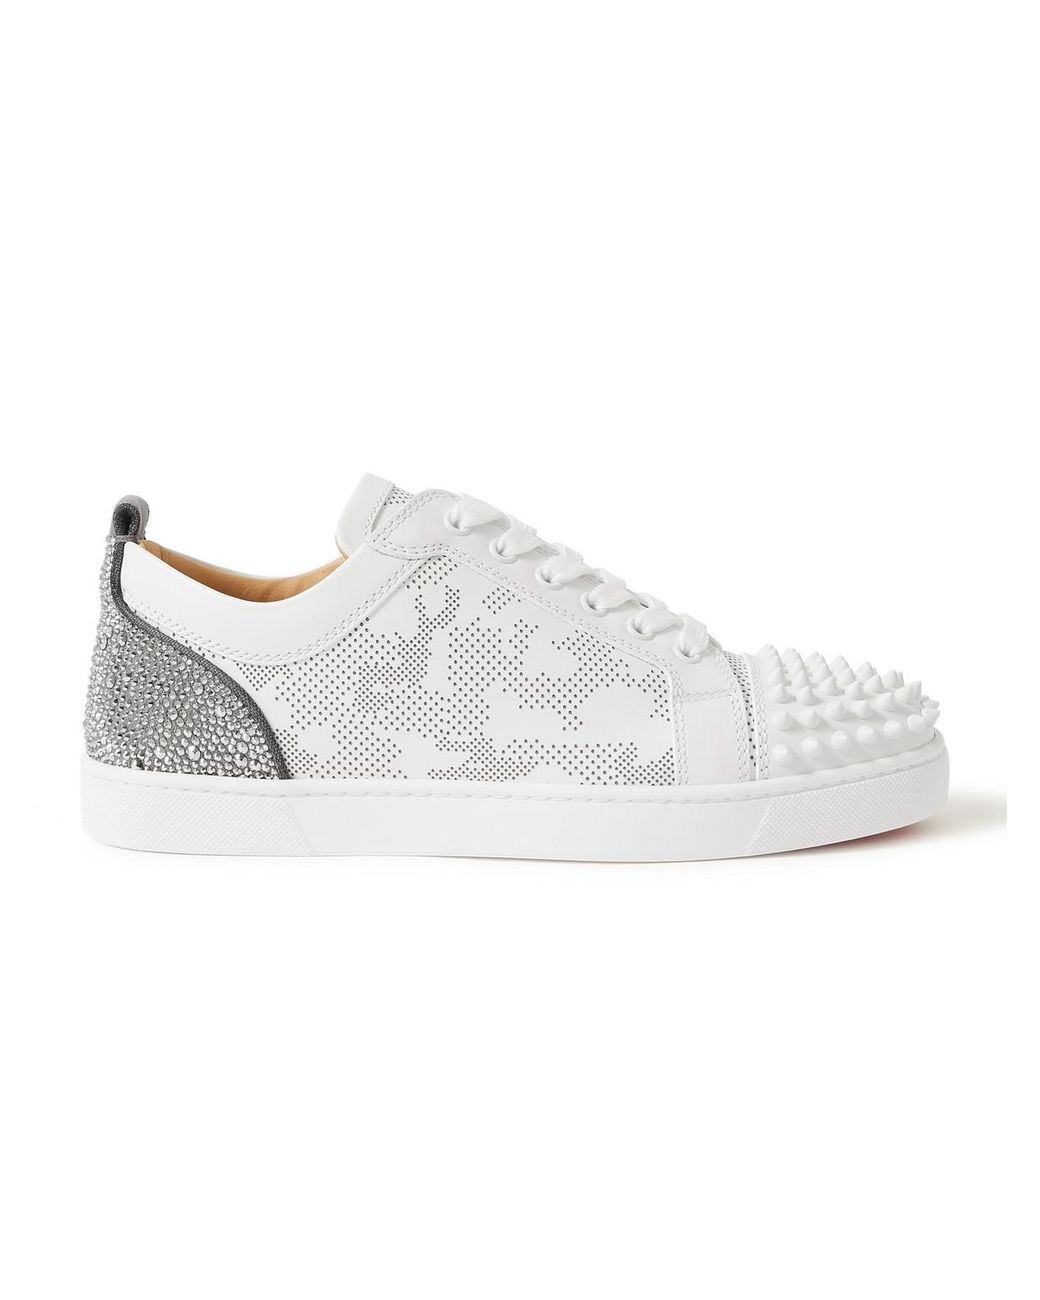 Christian Louboutin Louis Junior Spikes Perforated Leather Sneakers in White for Men Lyst